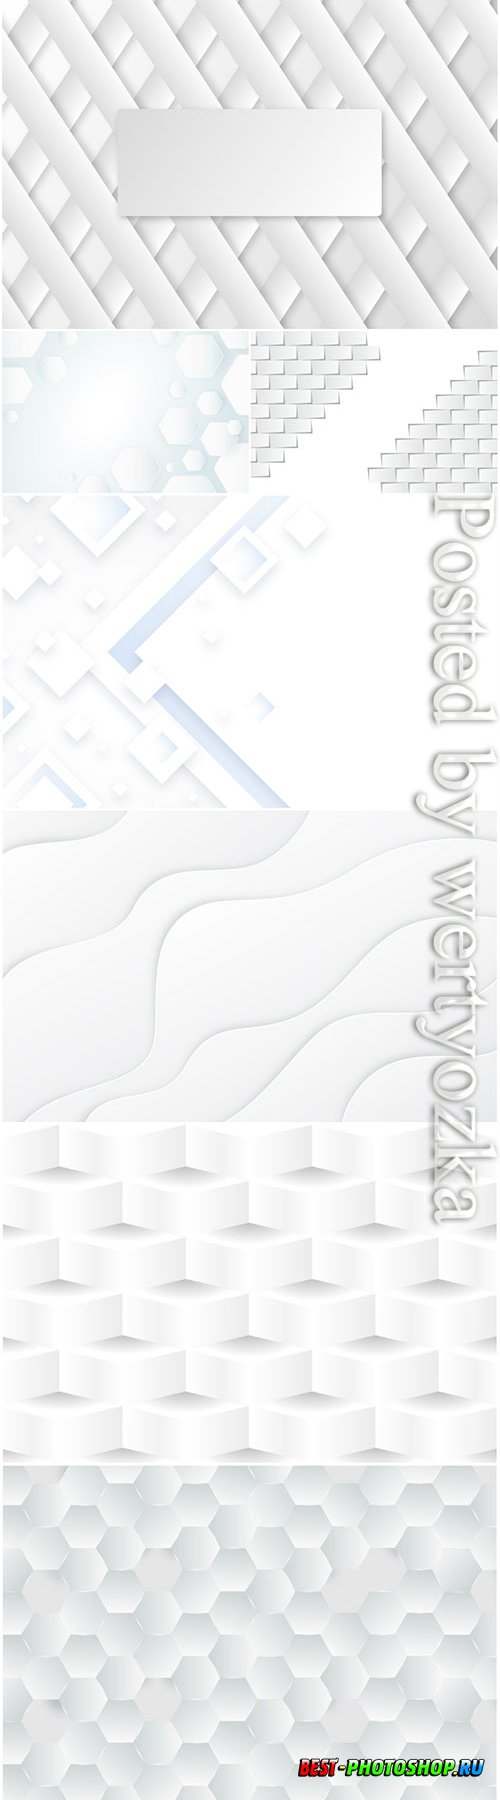 3d background with white abstract vector elements